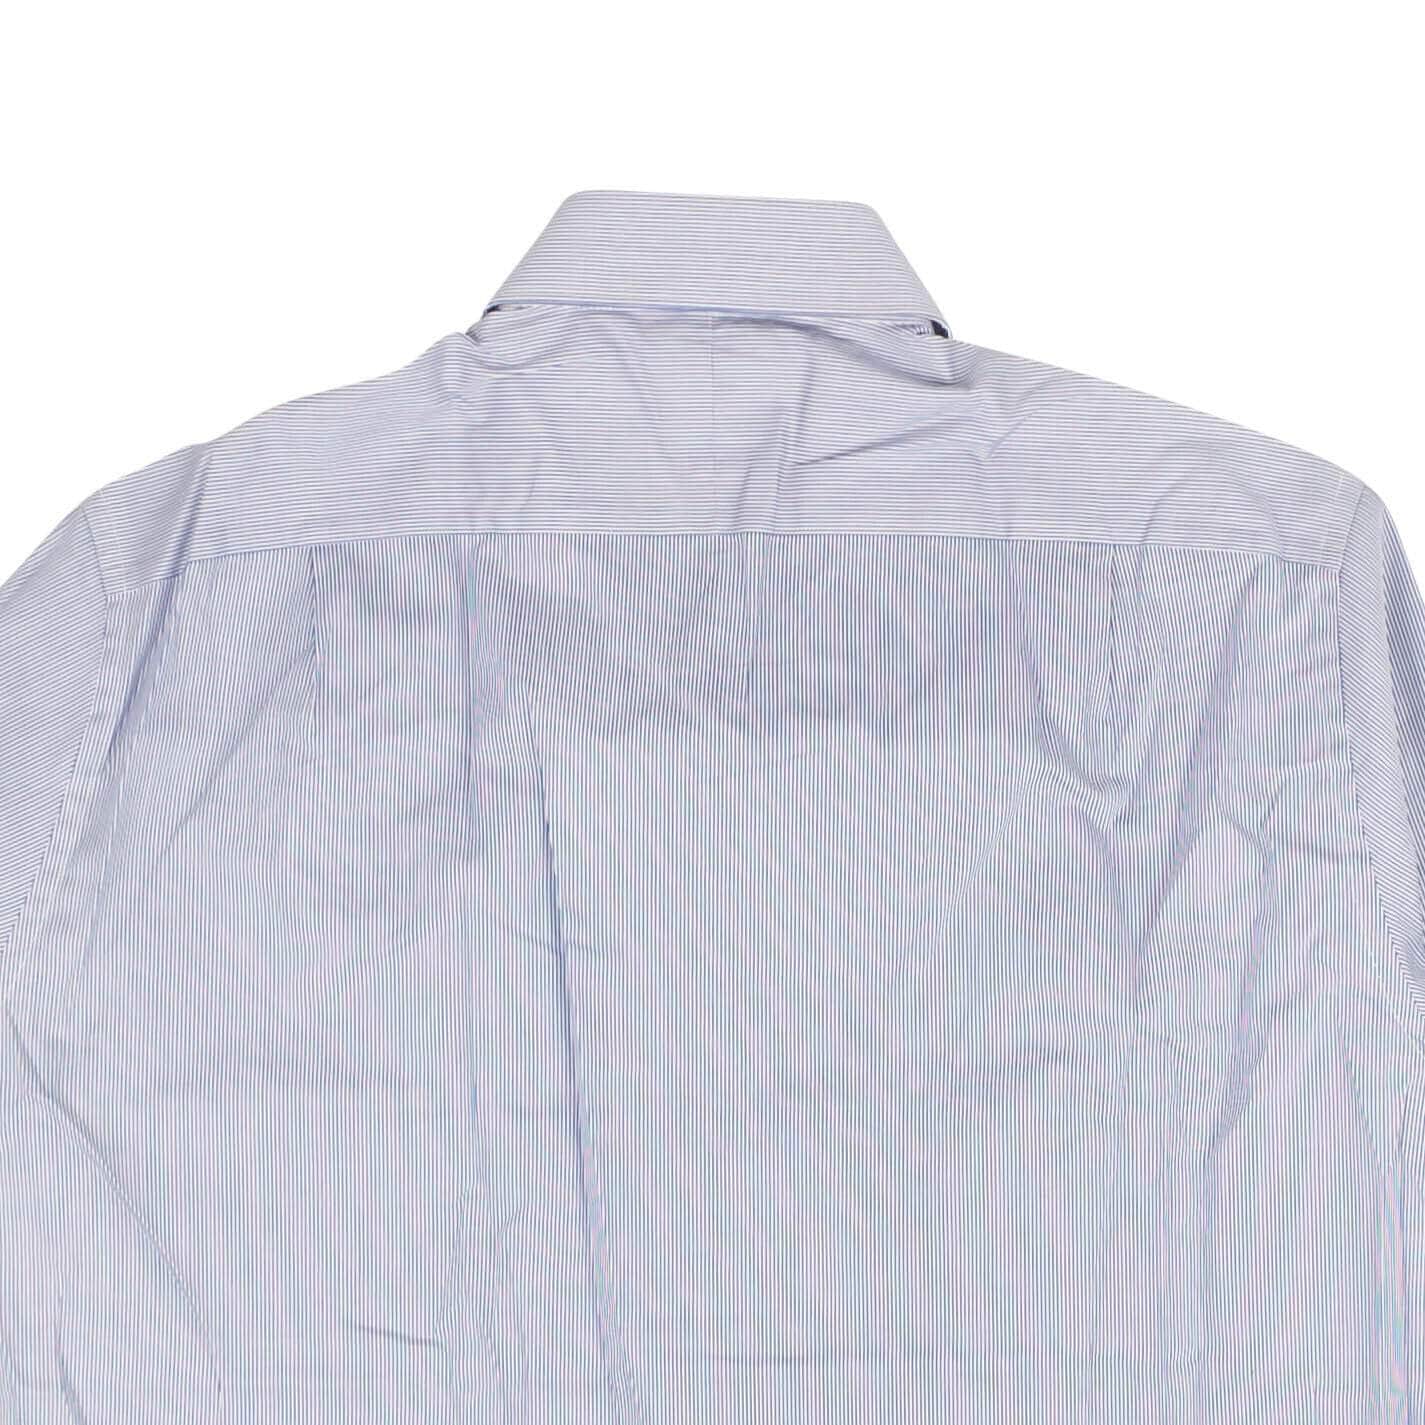 Ermenegildo Zegna 250-500, channelenable-all, chicmi, couponcollection, gender-mens, main-clothing, mens-shoes, size-44 44 Blue And White Pinstripe Dress Shirt 95-ZGN-1006/44 95-ZGN-1006/44